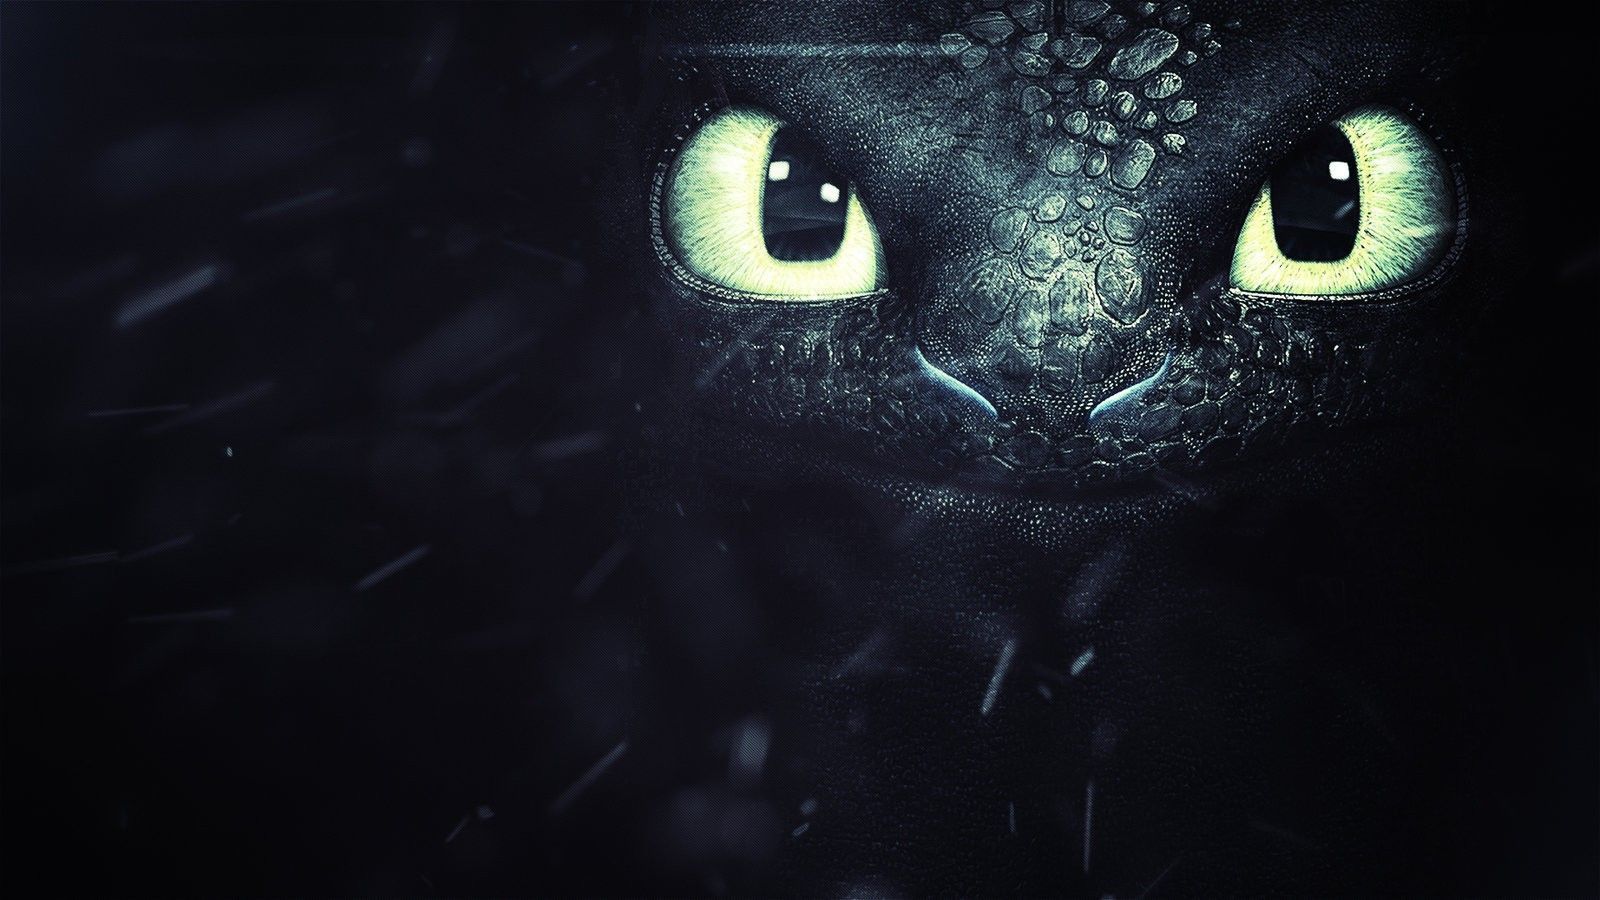 Little Black Dragon wallpapers and images - wallpapers, pictures ...